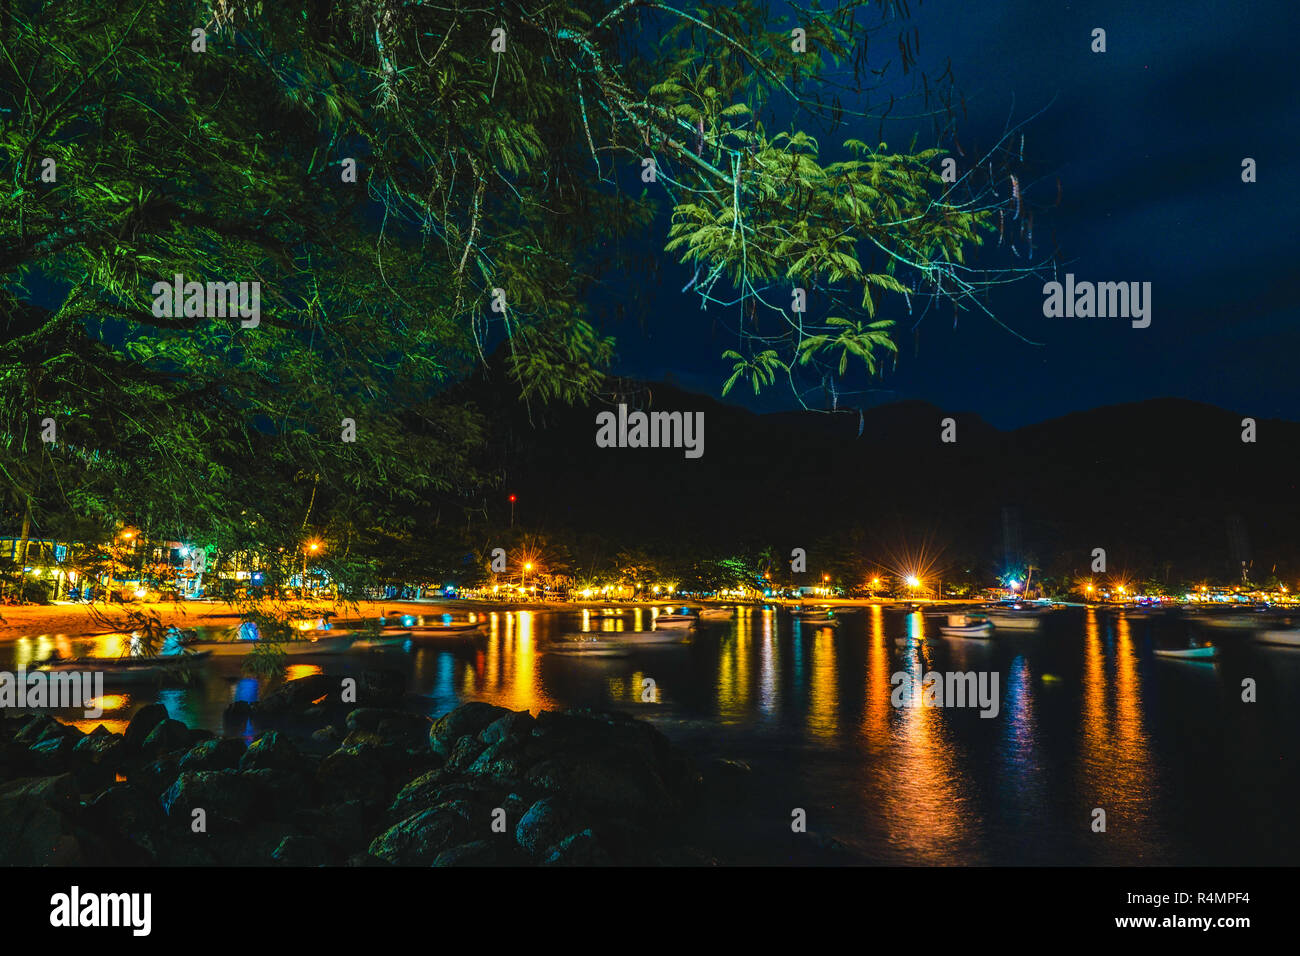 Night personal view of a beautiful beach landscape with lights, tree and boats Stock Photo